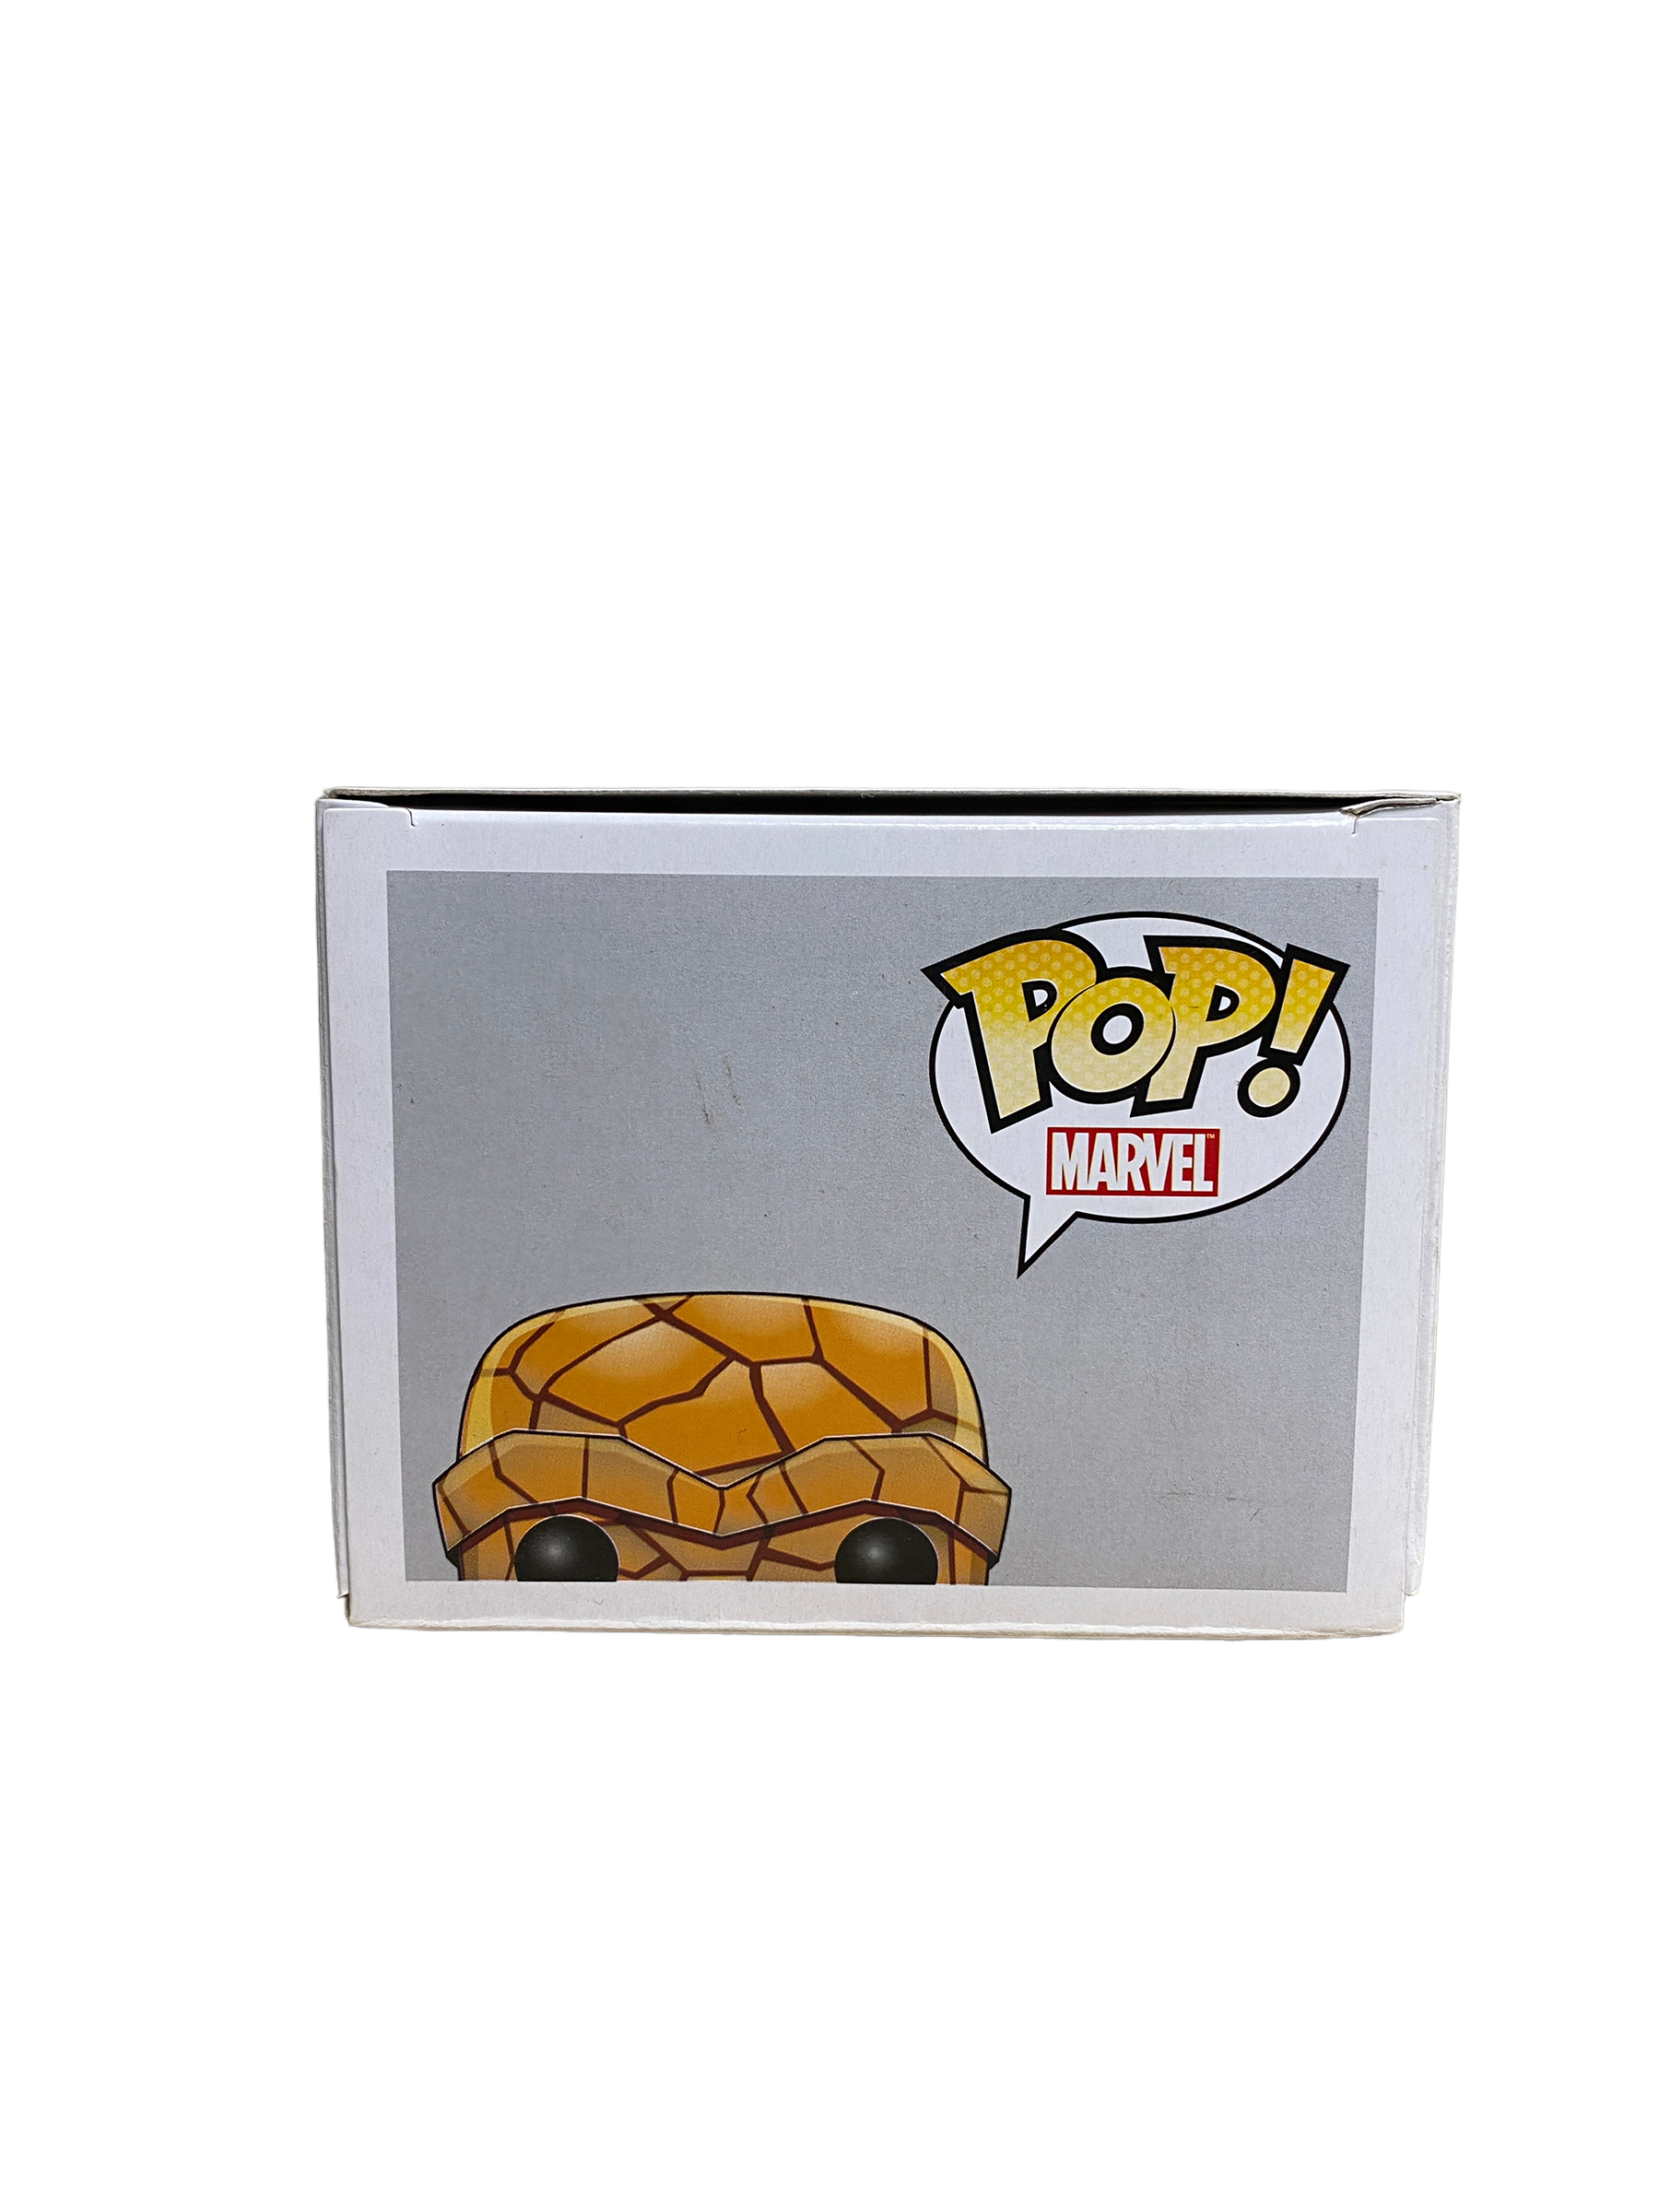 The Thing #09 (Metallic - Blue Eyes) Funko Pop! - Marvel Universe - SDCC 2011 Exclusive LE480 Pcs - Condition 8/10